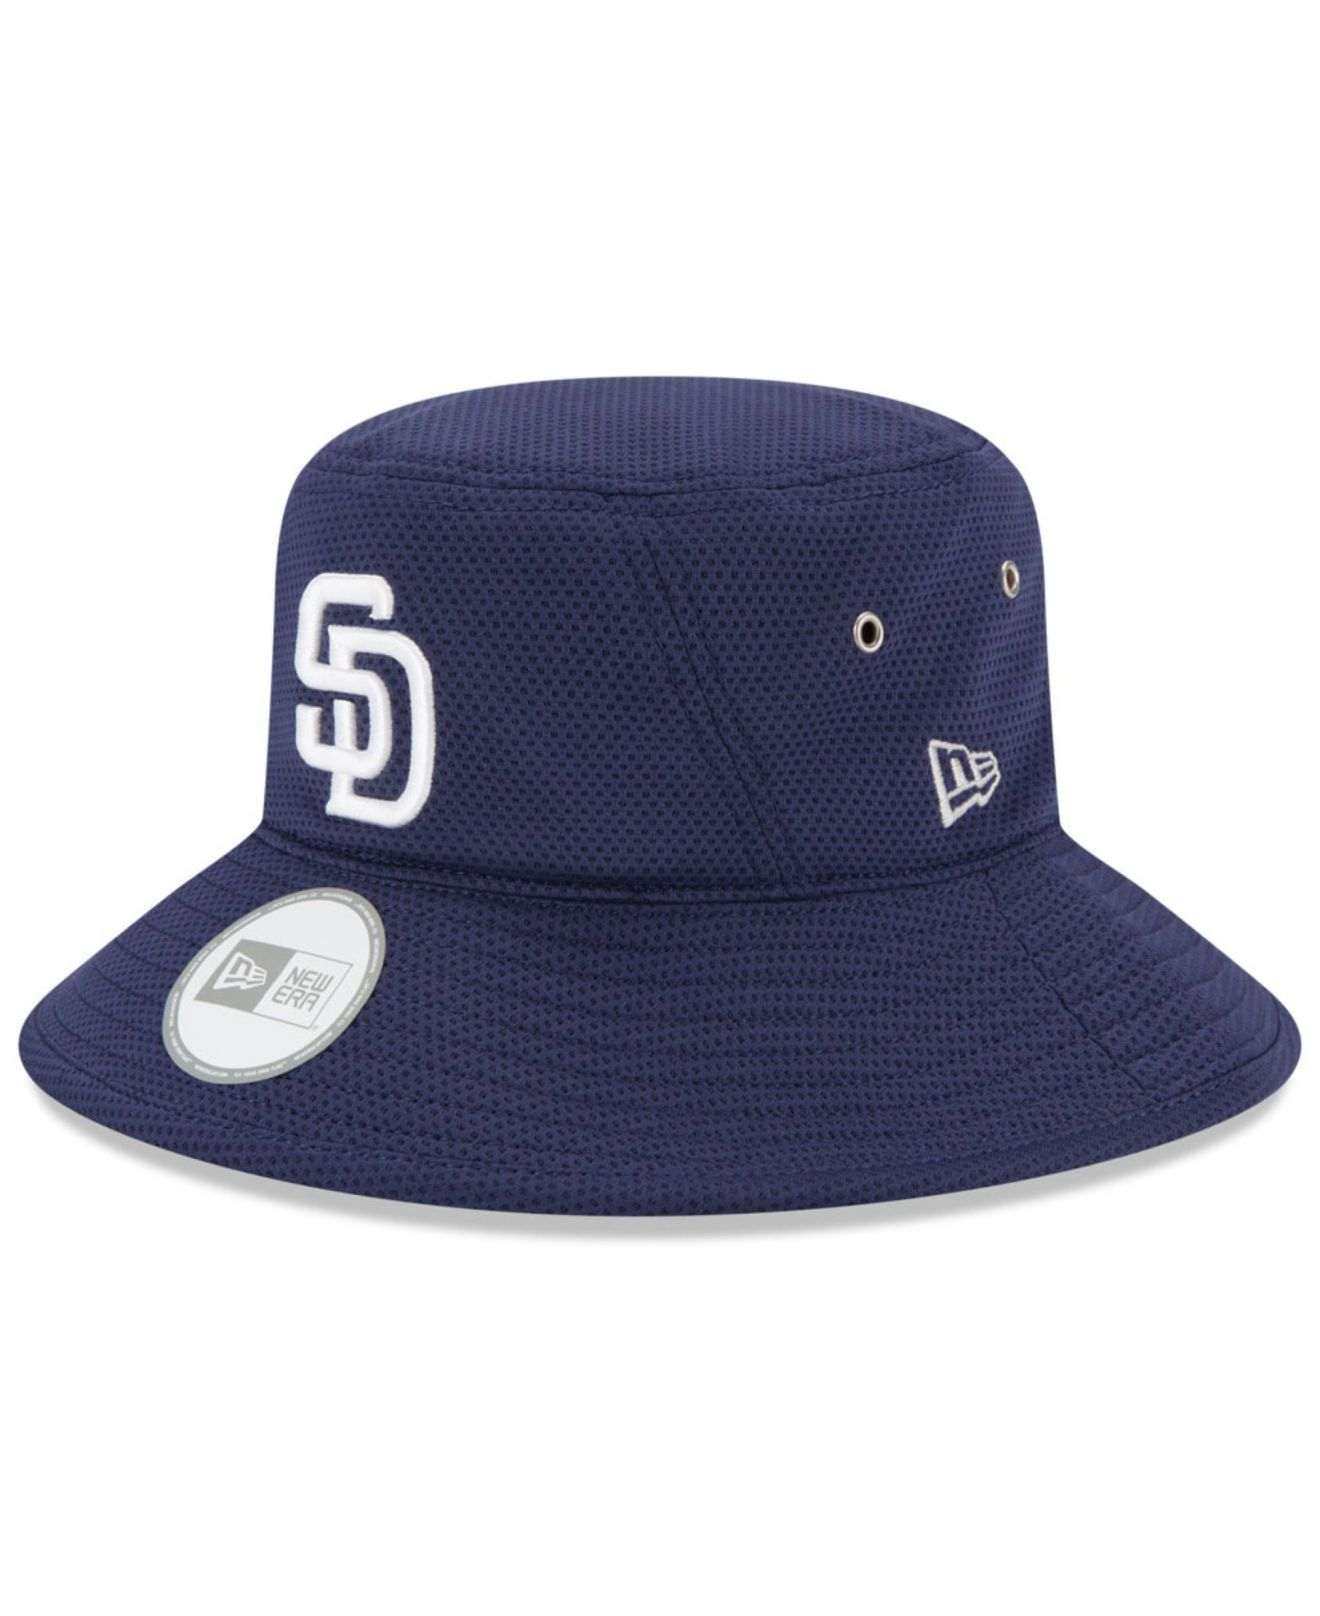 San Diego Padres on X: “These bucket hats are sick.” - @itsFatherJoe44,  probably Don't forget single-game tickets go on sale on Tuesday, February 7  at 10am PT:   / X